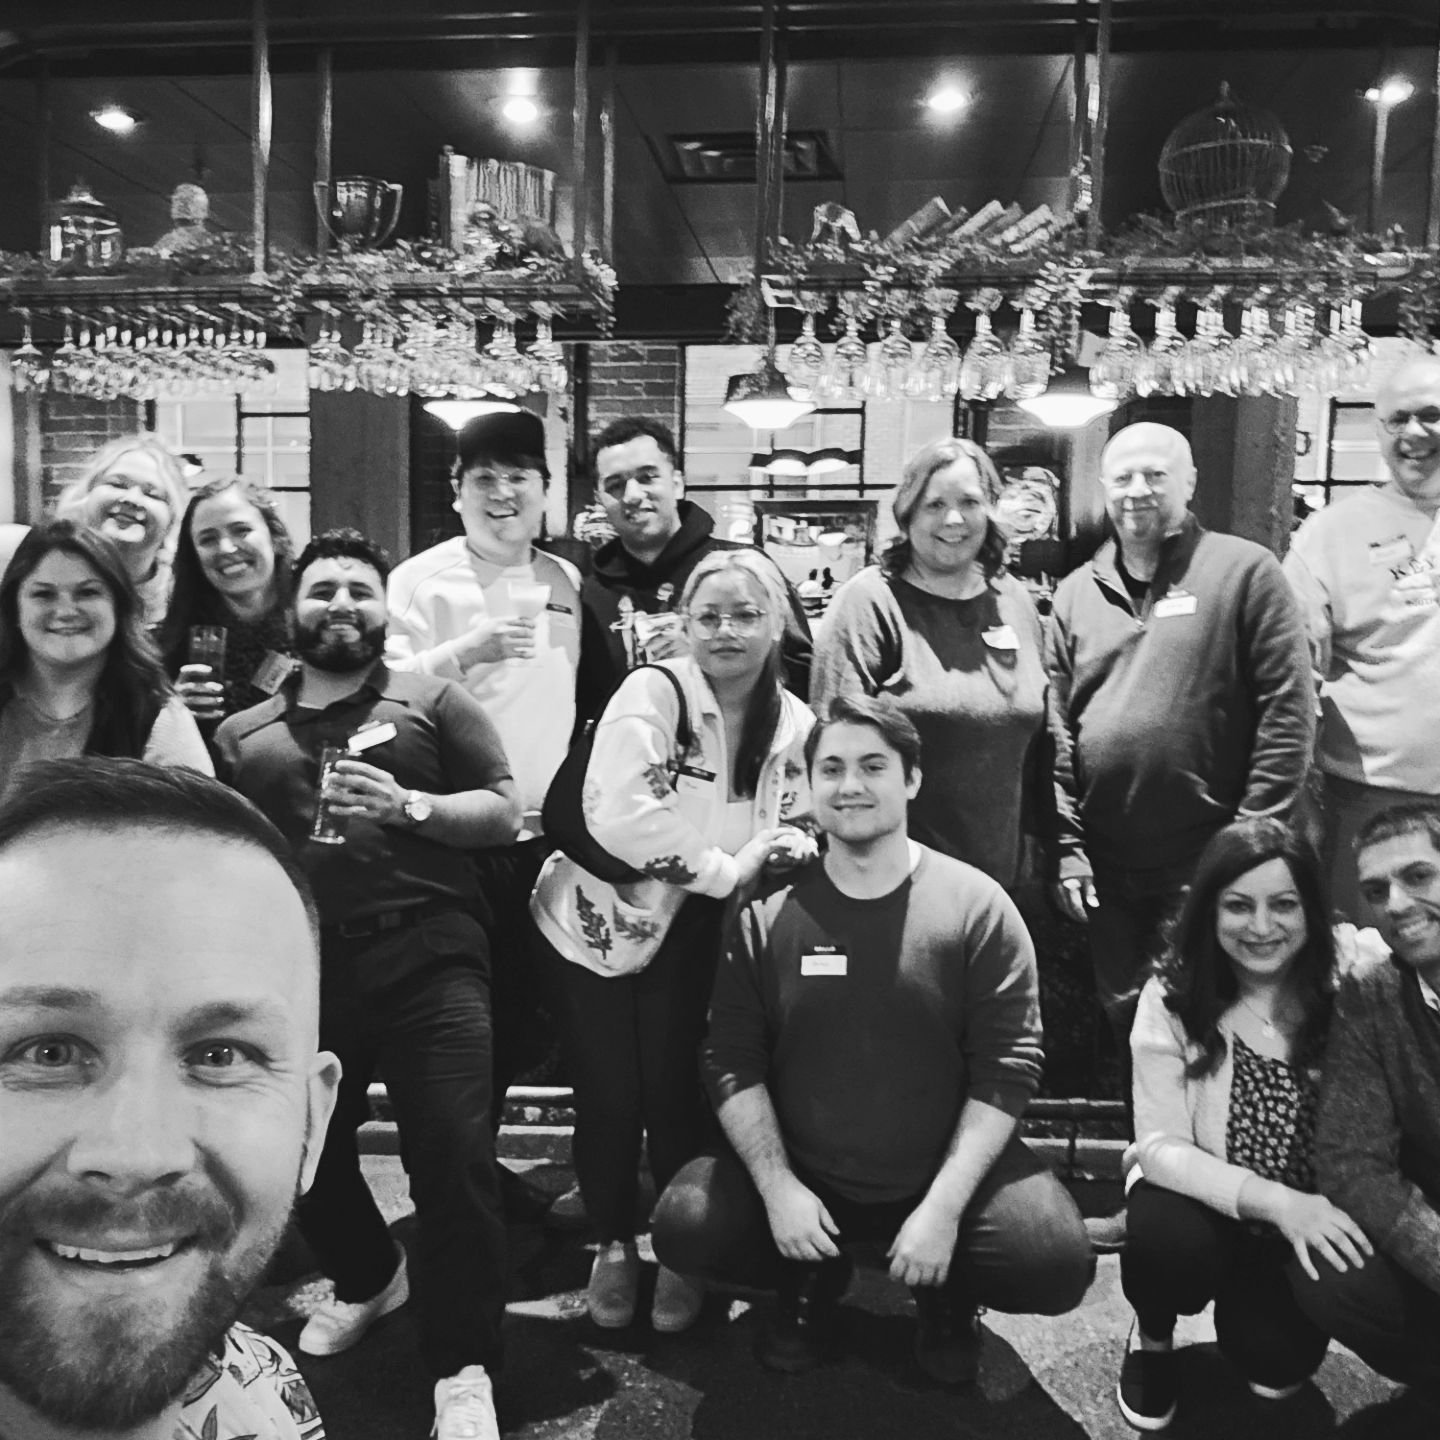 New Mixology pro's! What a great class! 
#mixology #northloopmpls #cocktailclass